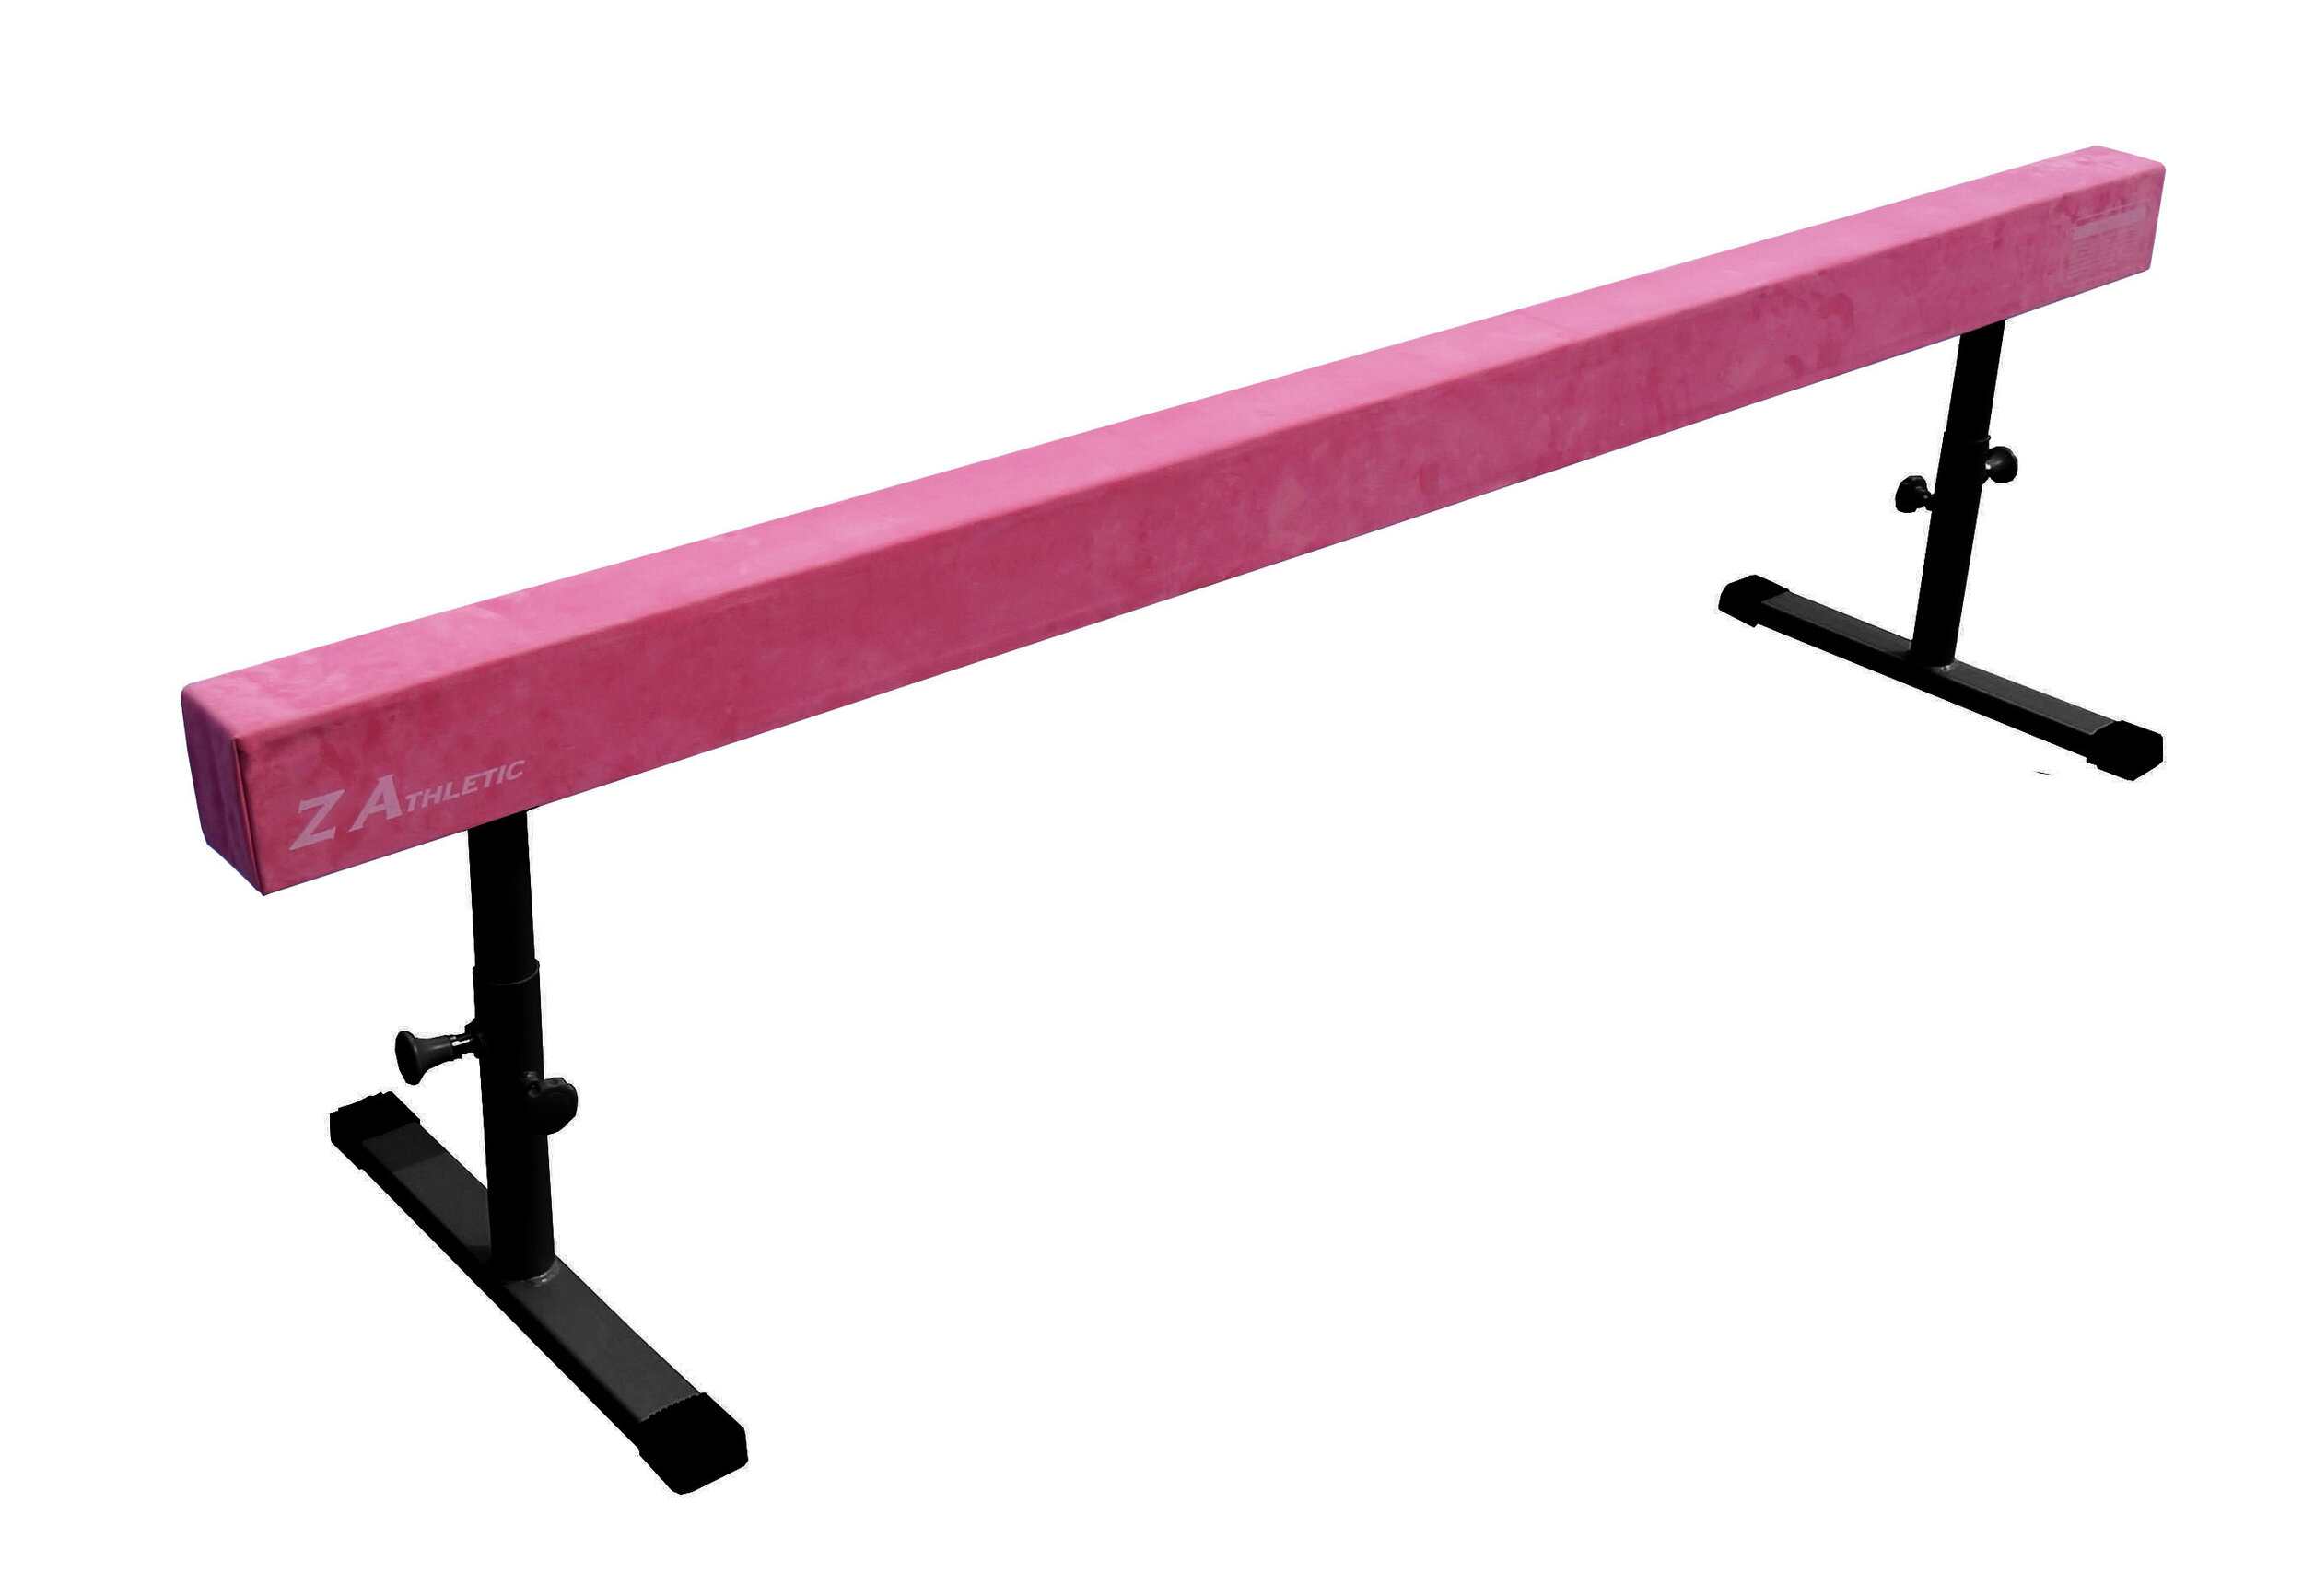 Z Athletic Attachable Foam 4ft Floor Balance Beam Multiple Colors and Counts 